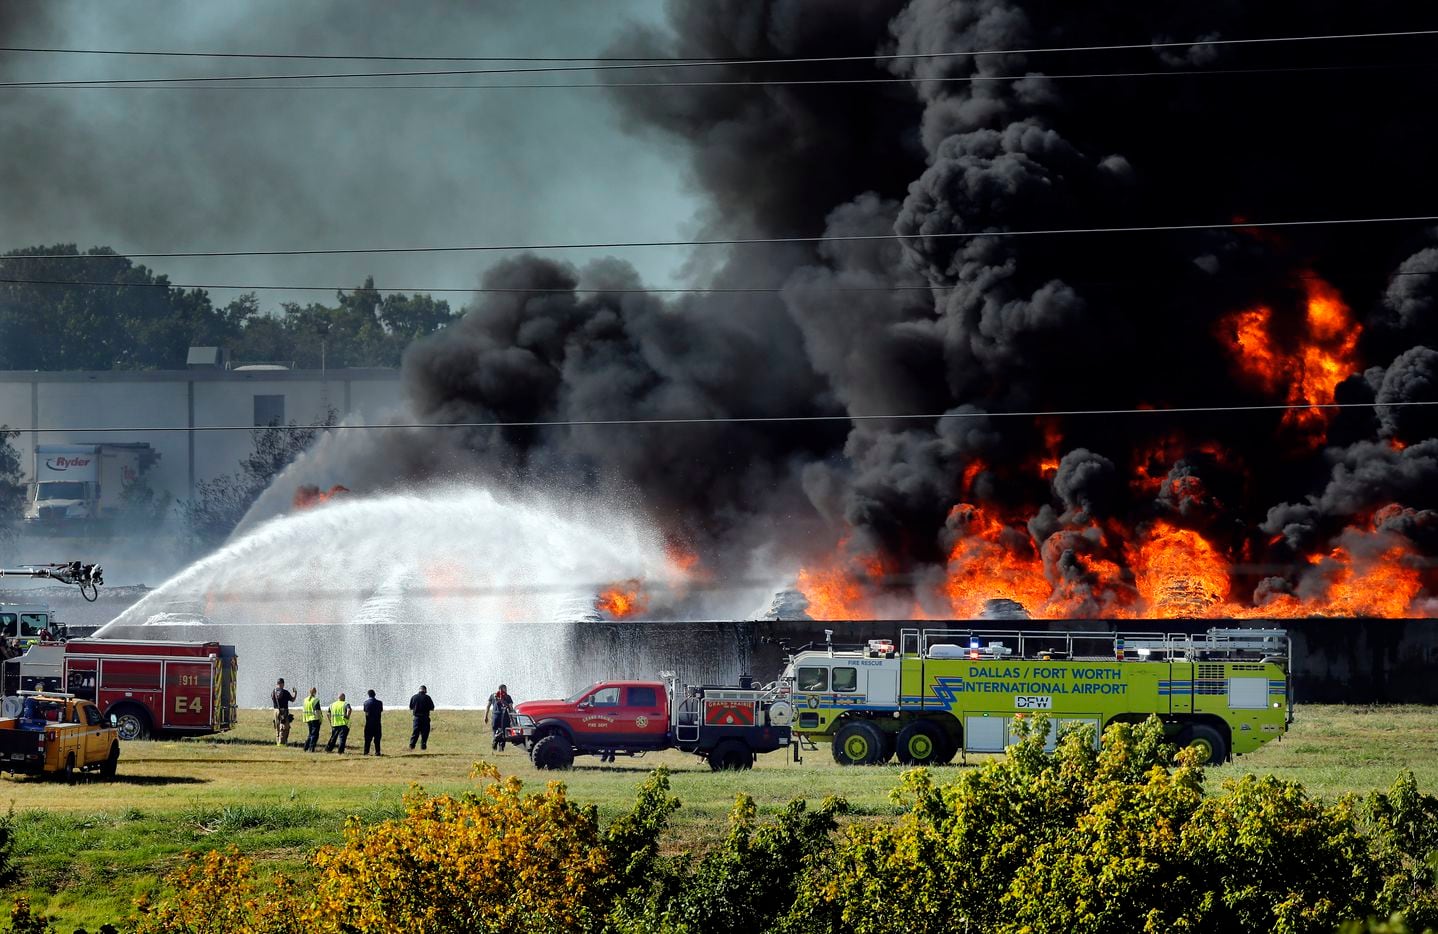 Grand Prairie and DFW International Airport firefighters douse burning plastic which caught fire at Poly-America at 2000 West Marshall Drive in Grand Prairie, Texas, Wednesday, August 19, 2020.